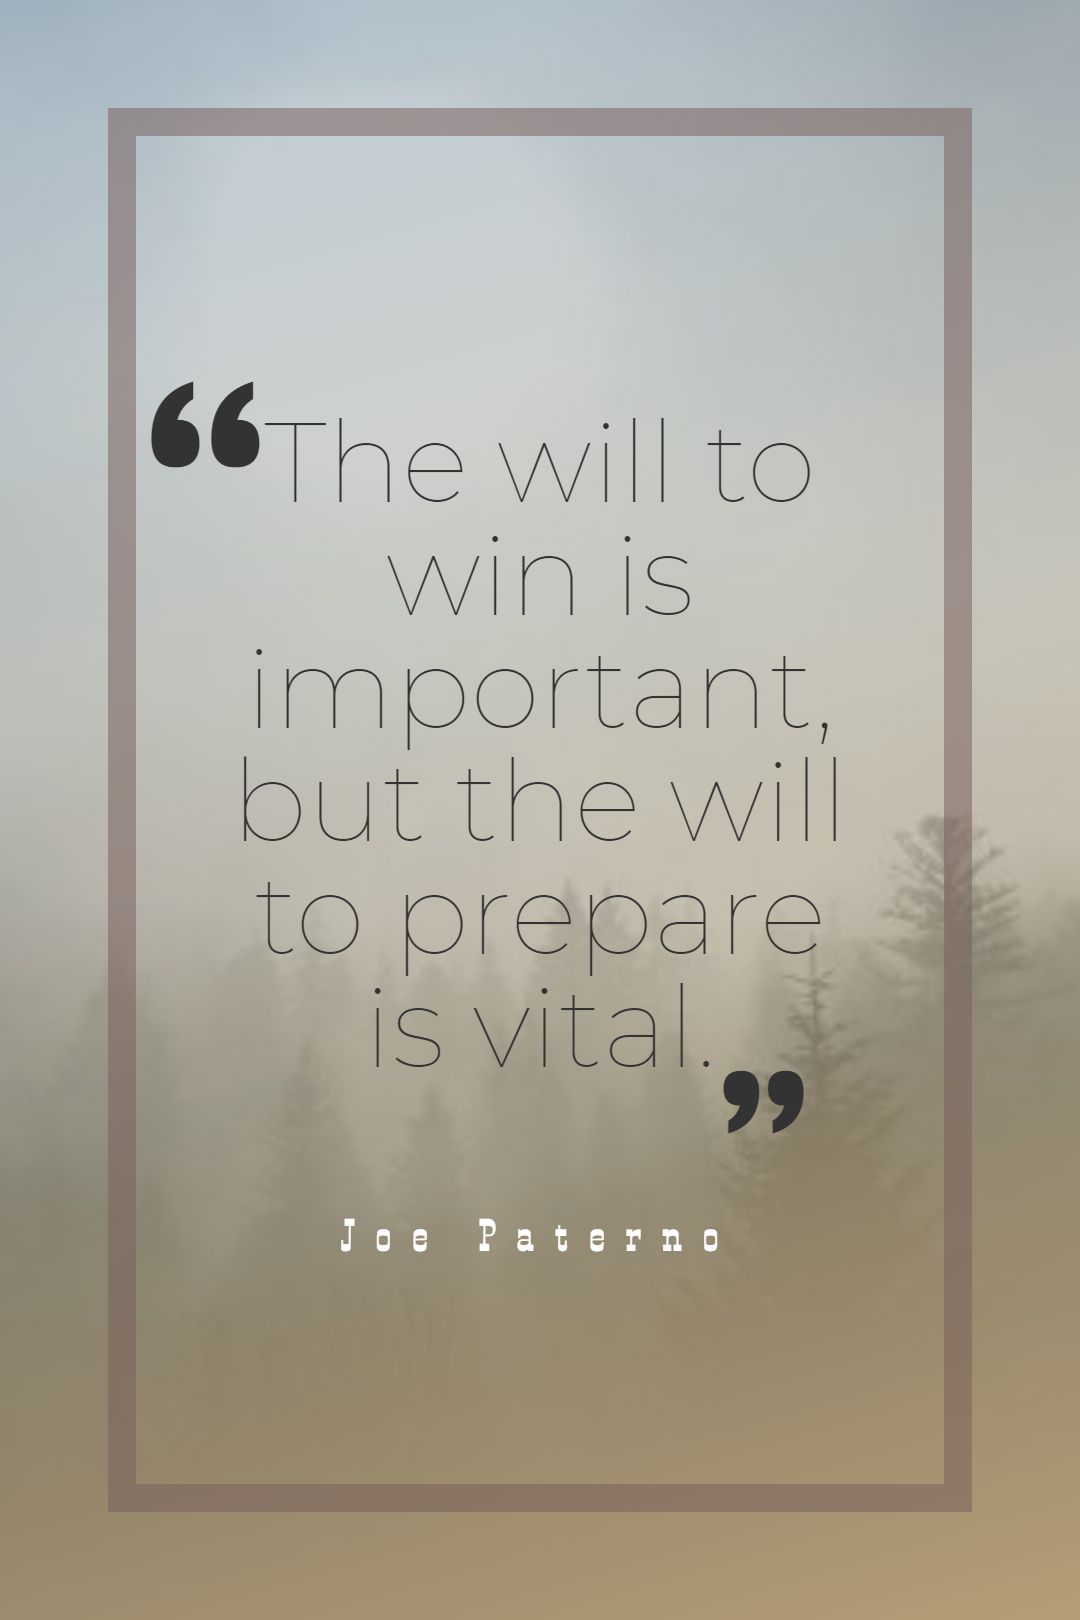 The will to win is important but the will to prepare is vital.